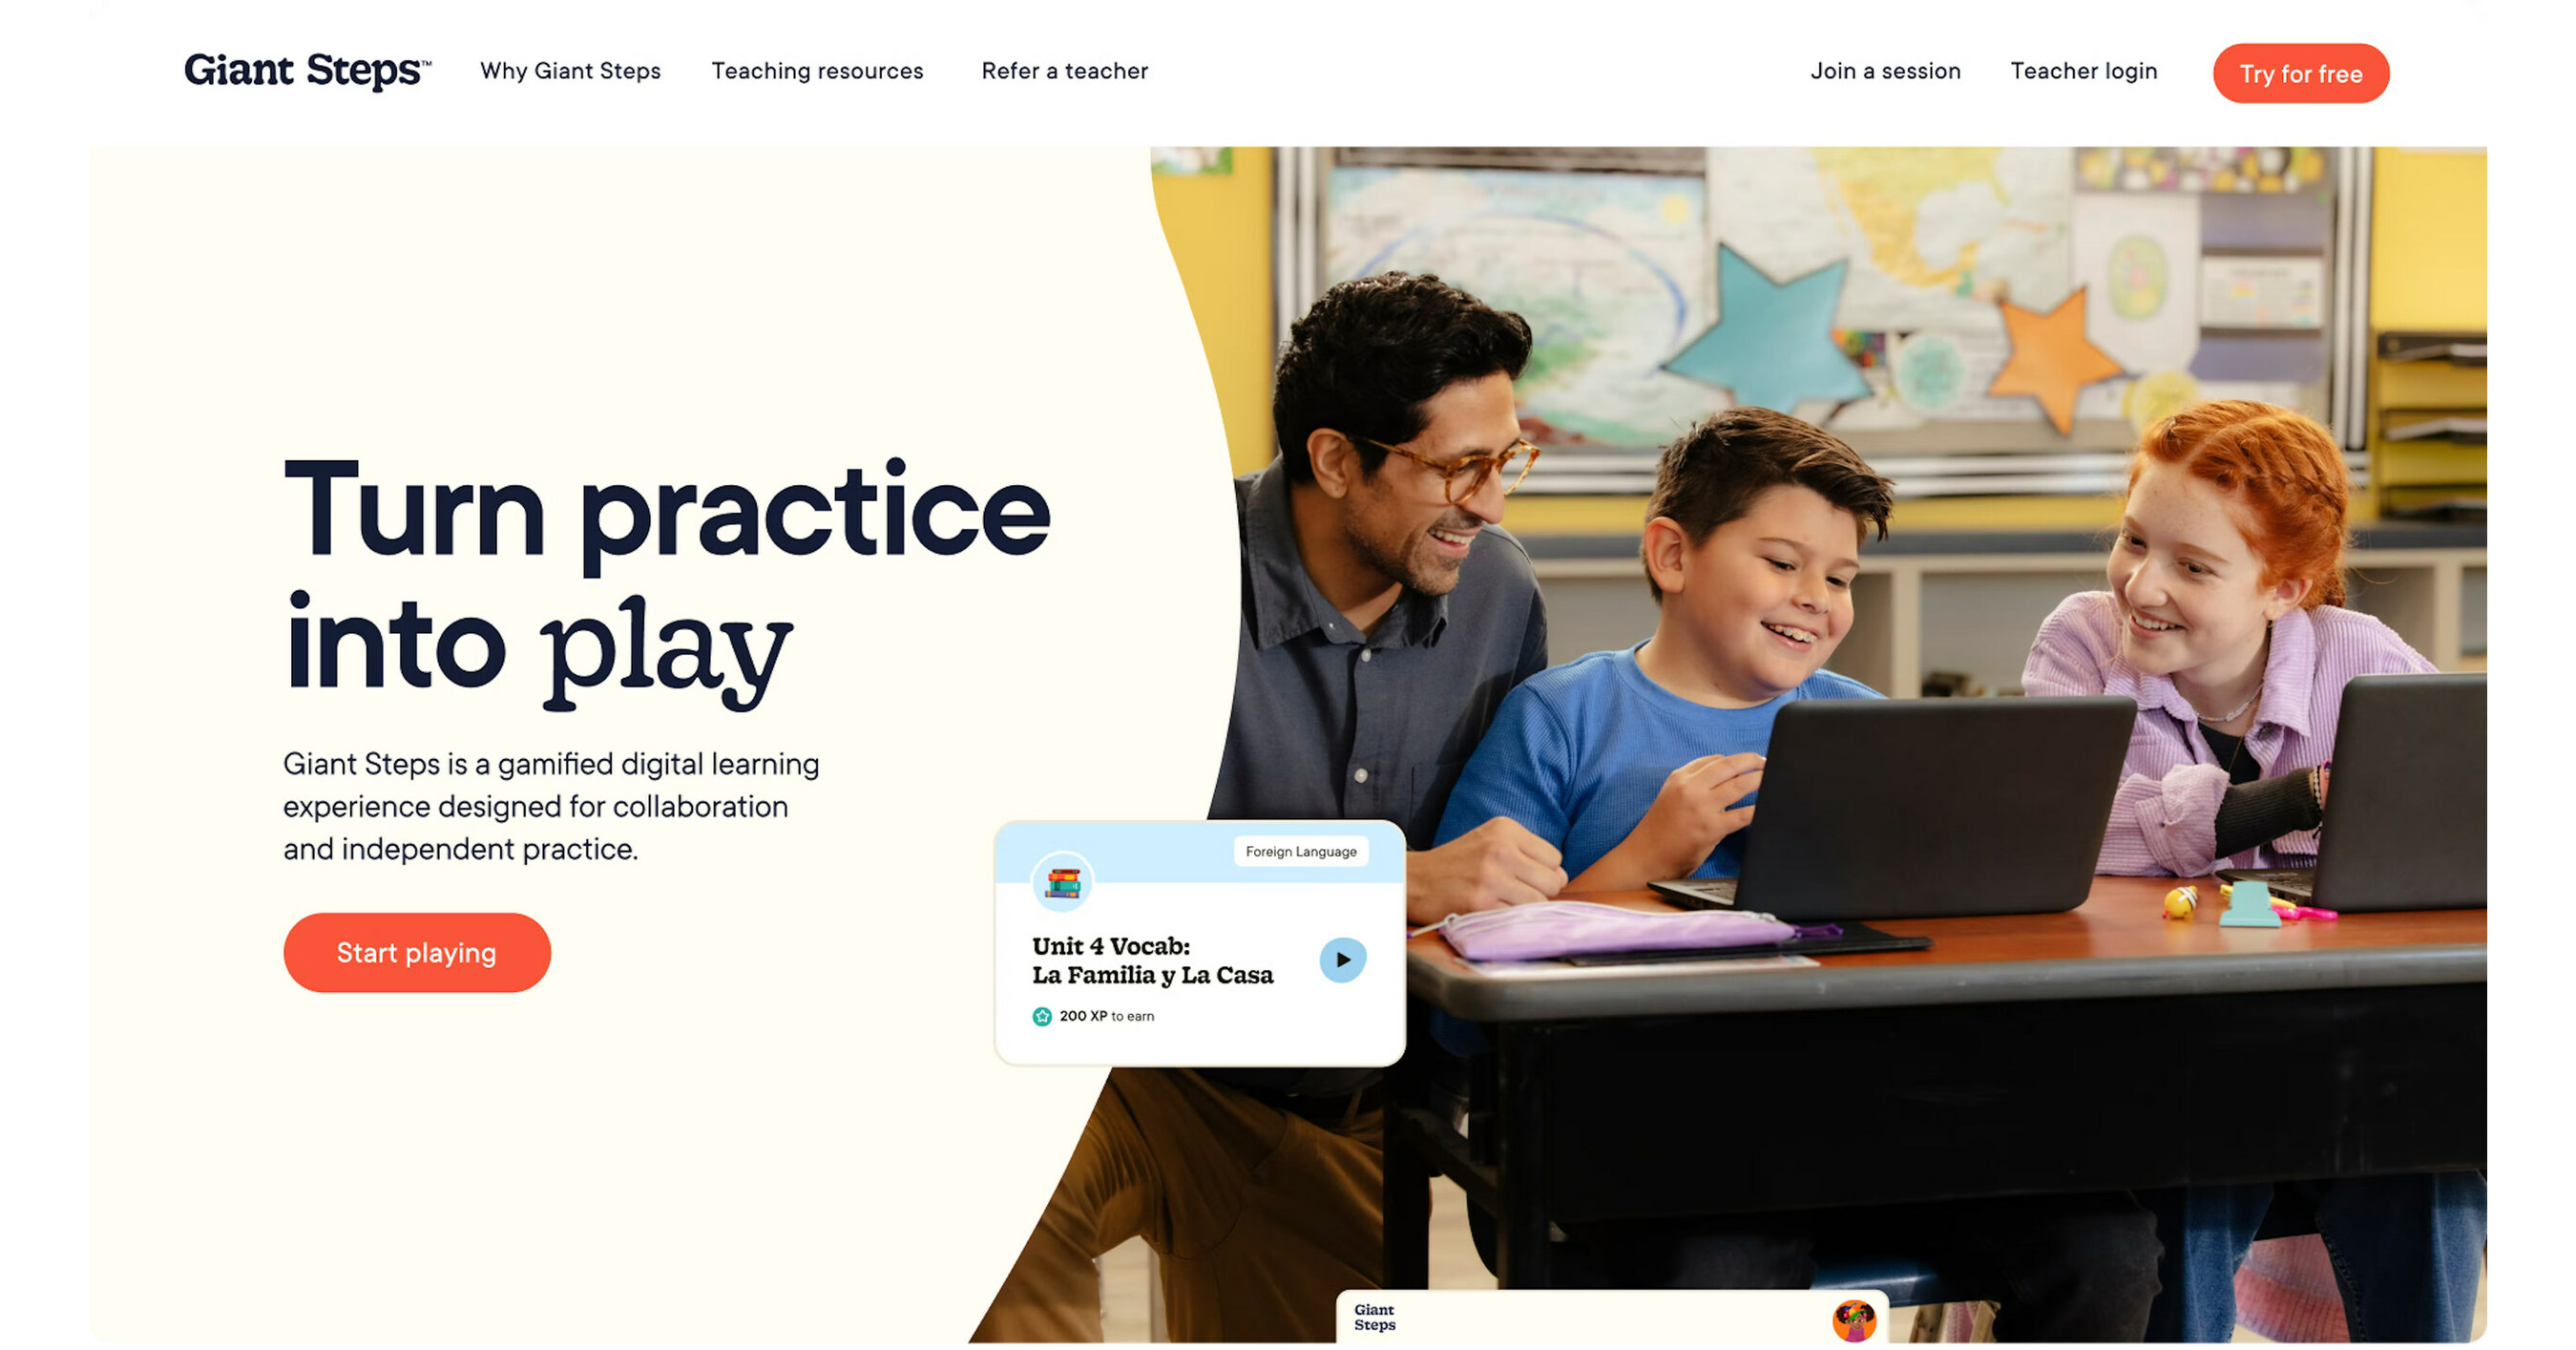 Stagwell’s (STGW) Instrument Launches Giant Steps, Gamified K-12 Learning Platform from GoGuardian